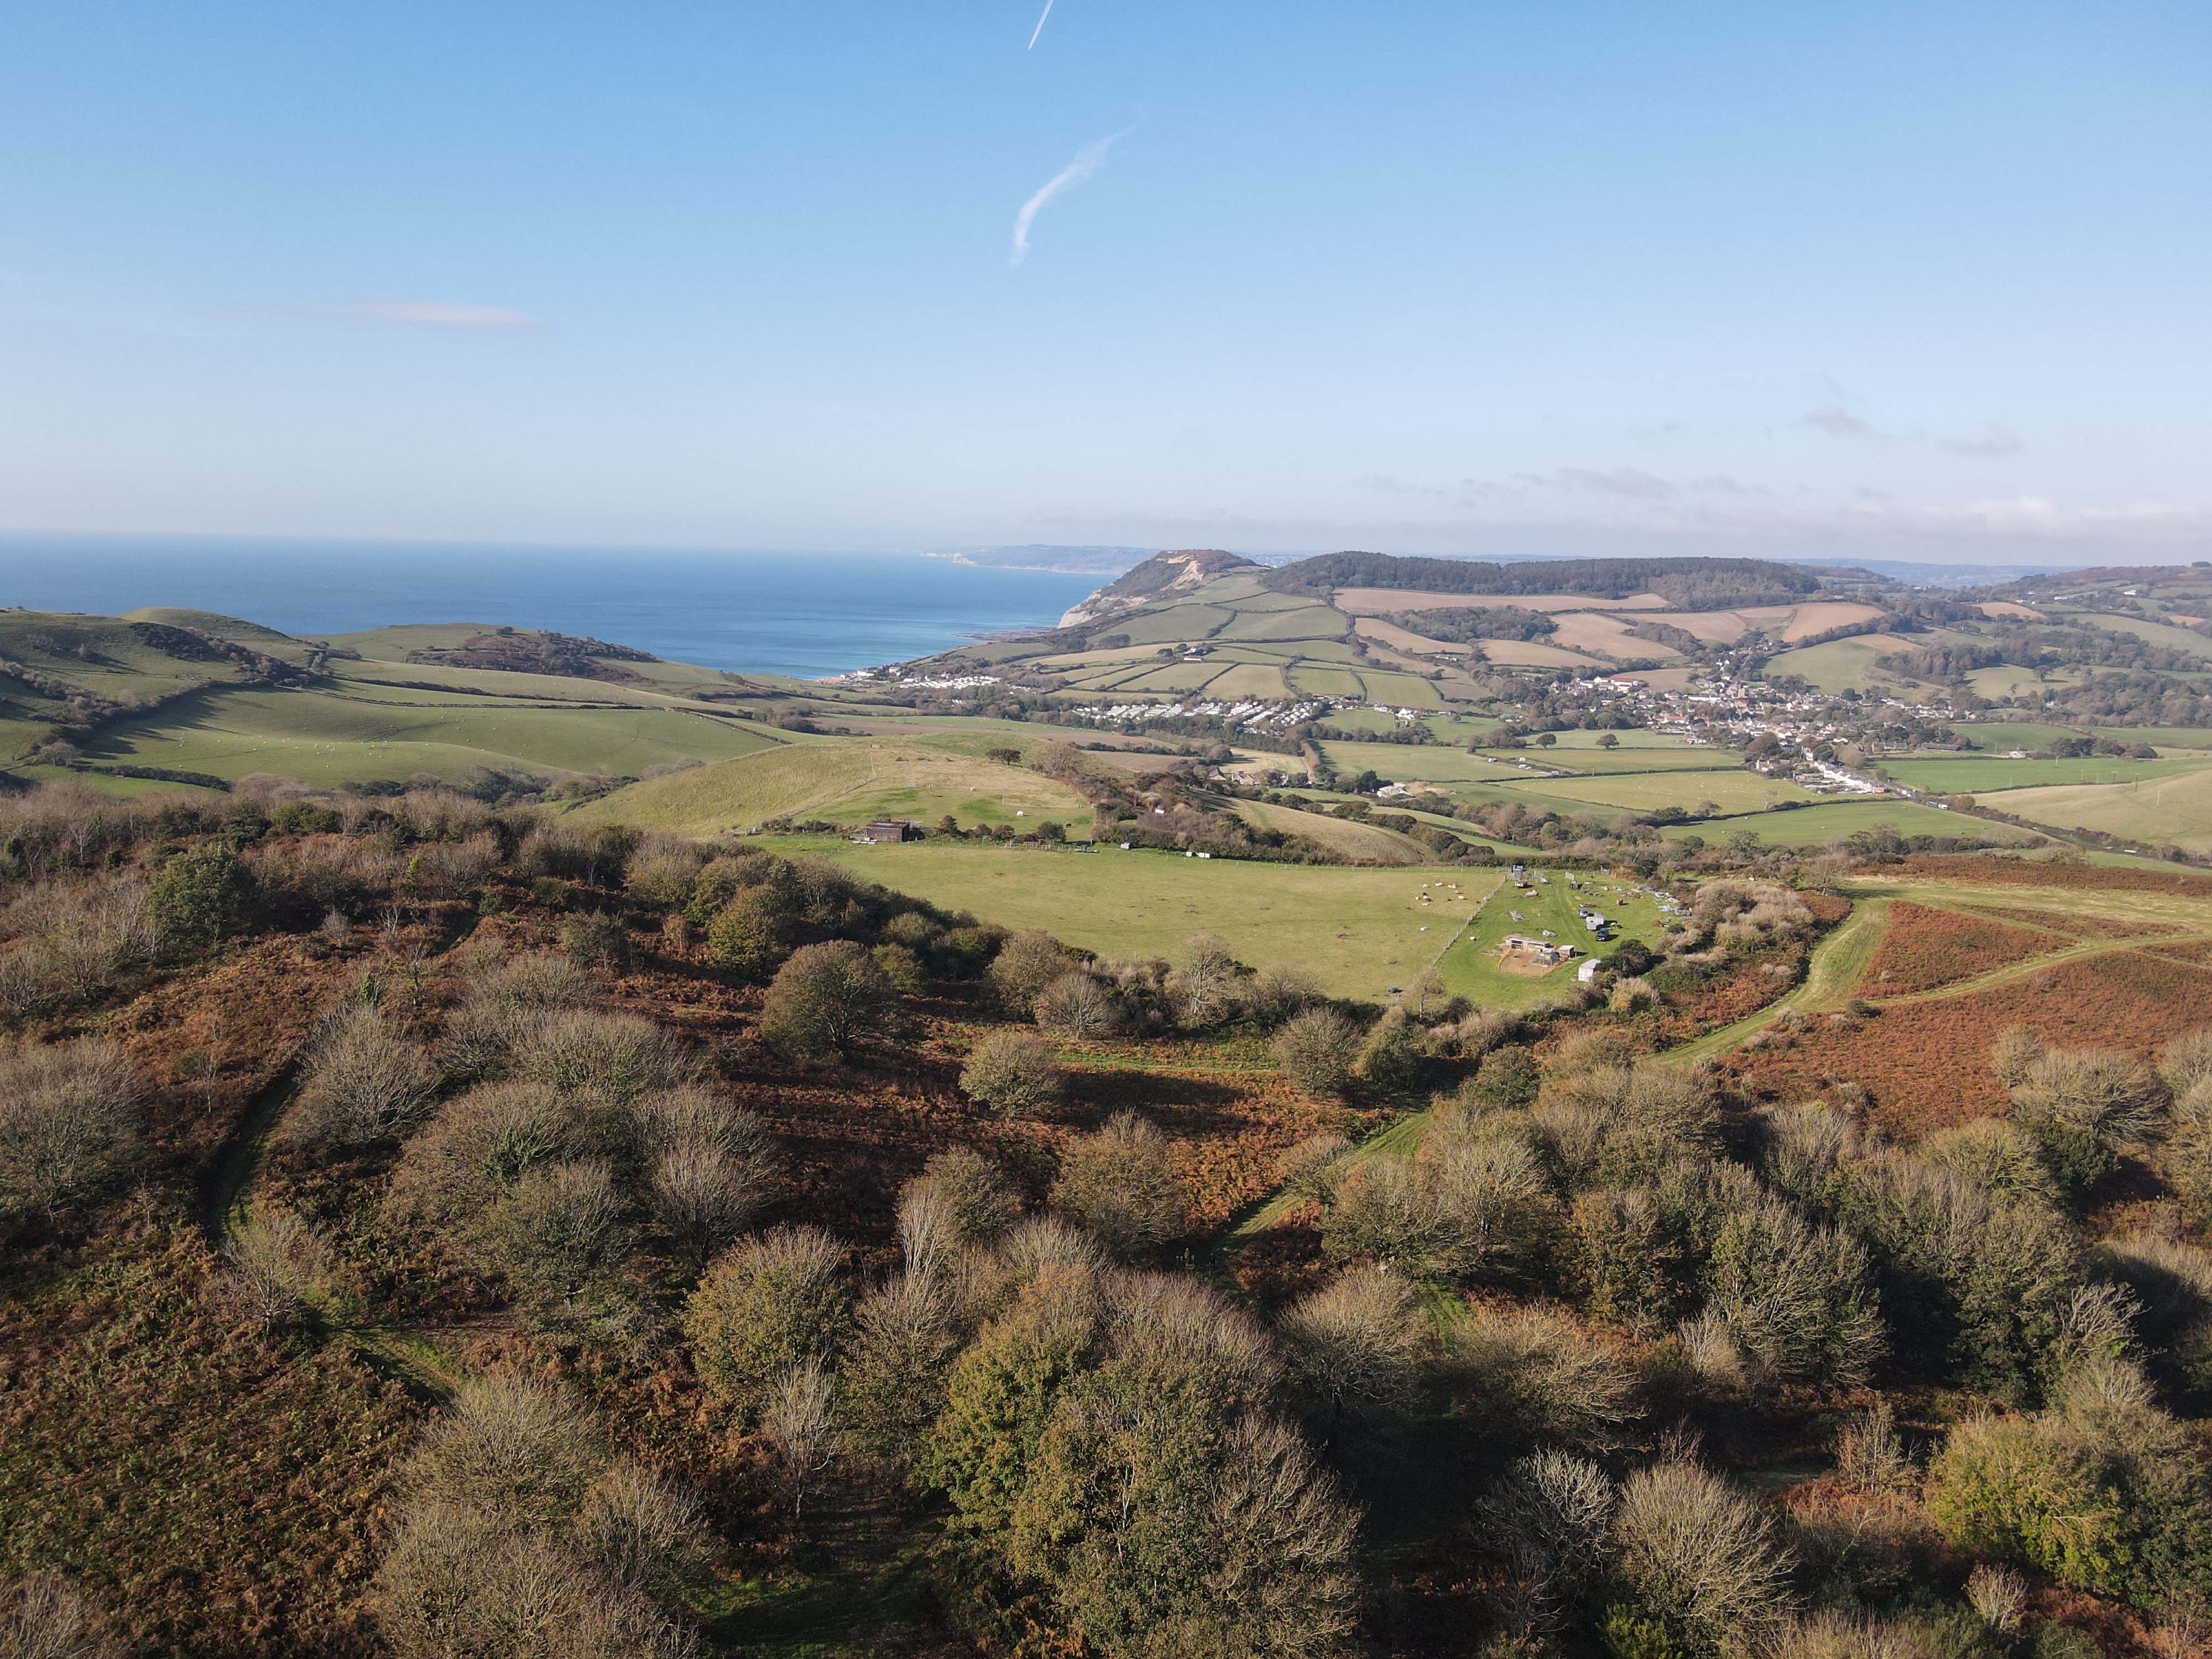 Looking back towards Charmouth and Lyme Regis